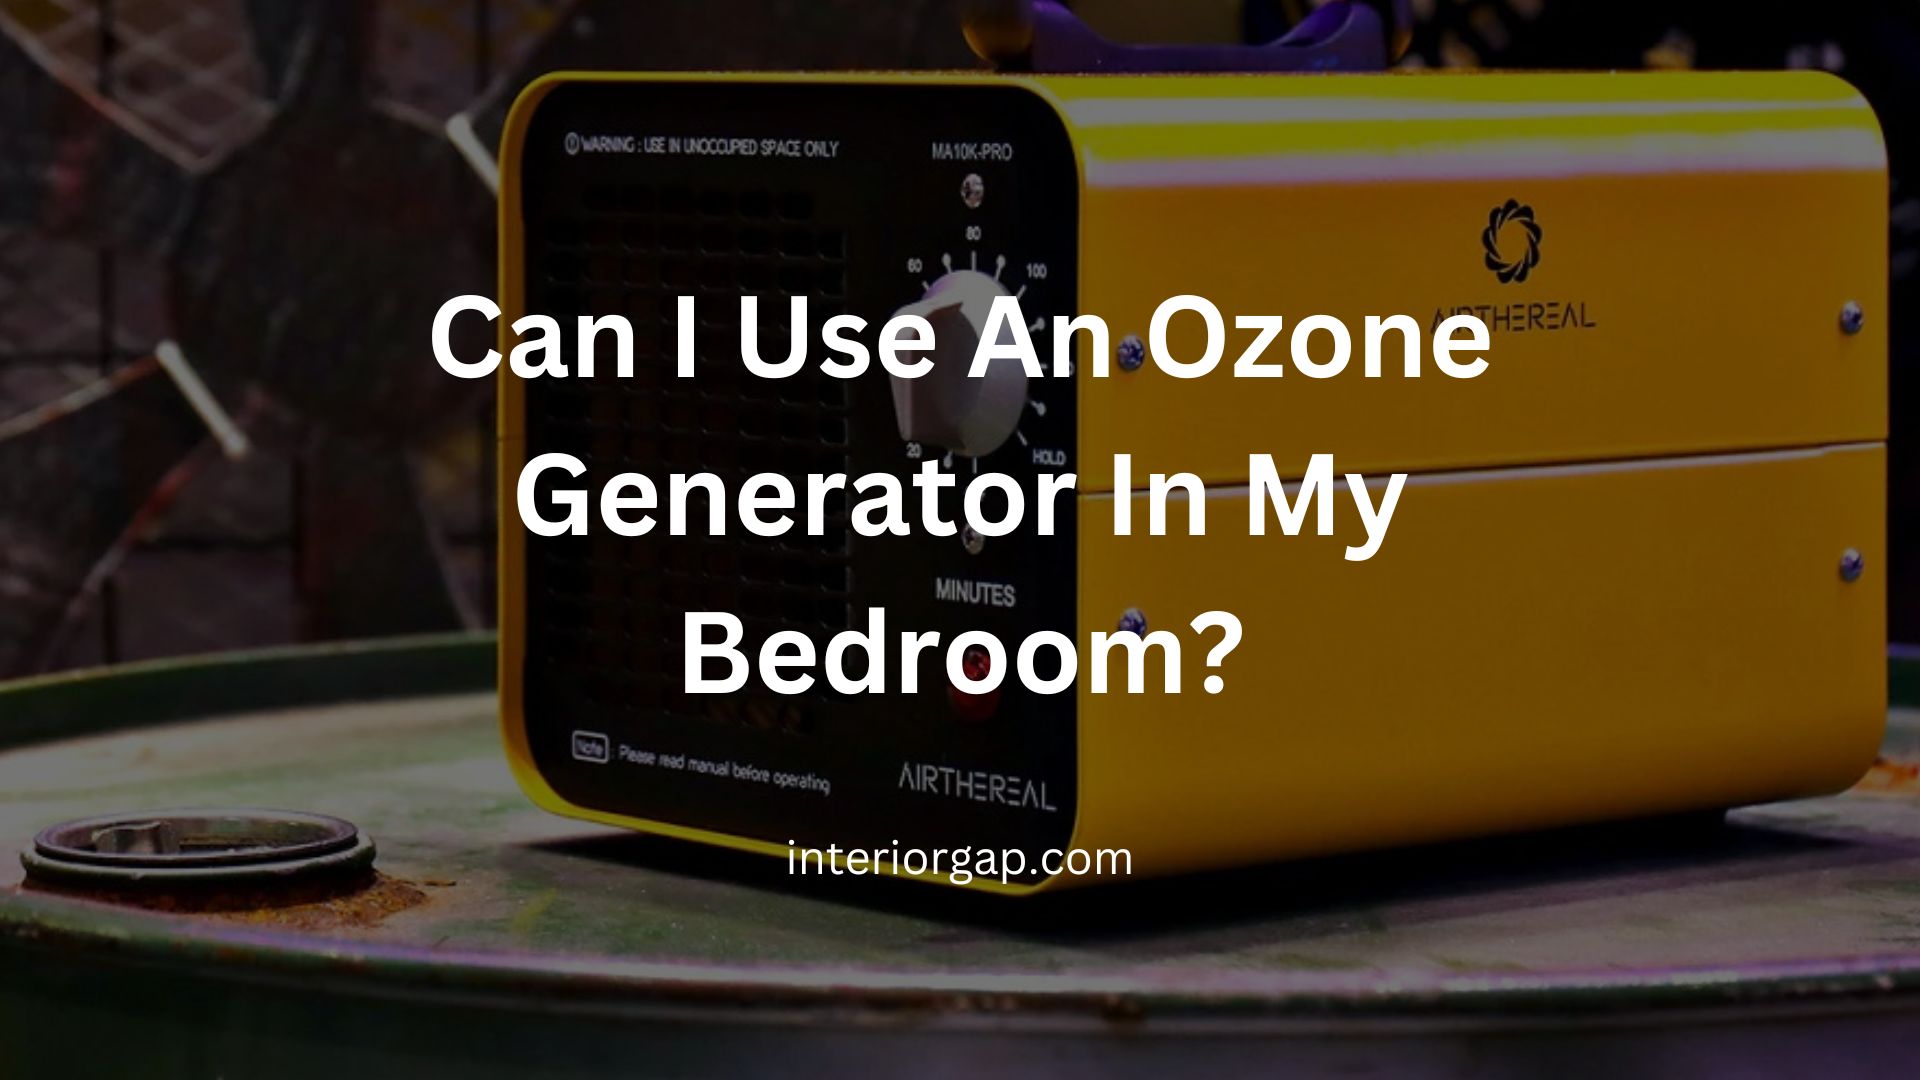 Can I Use An Ozone Generator In My Bedroom?